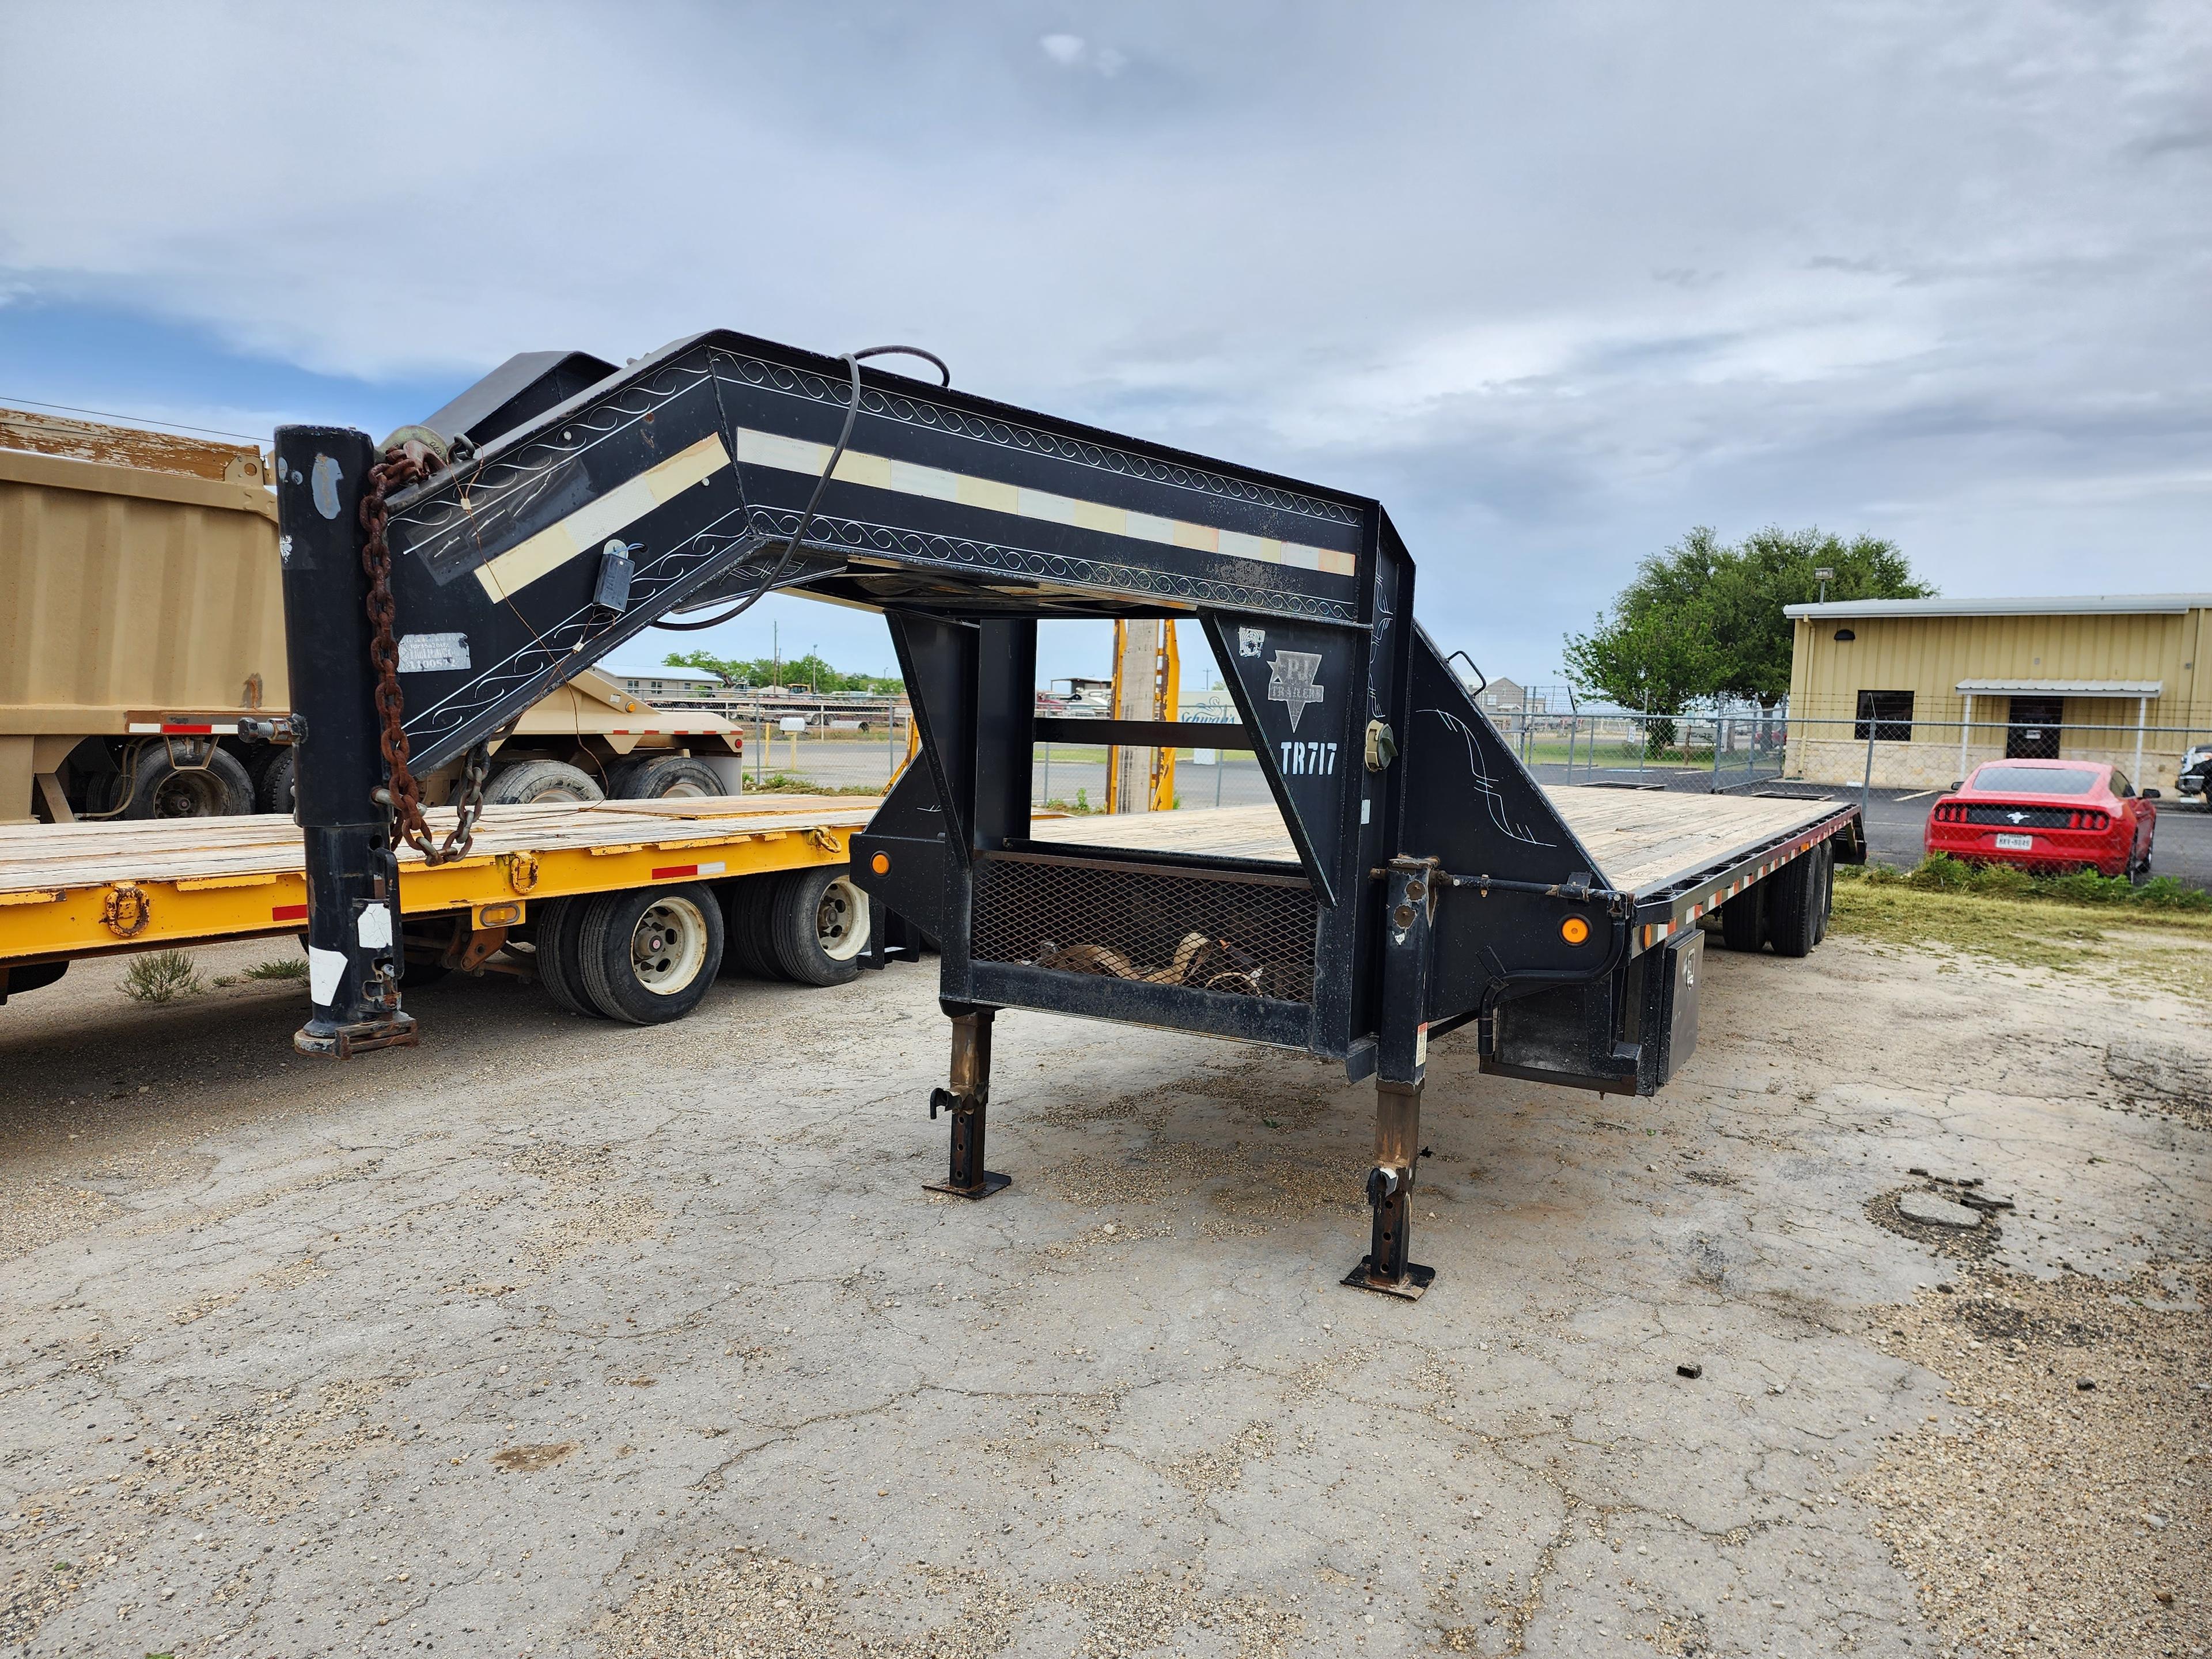 Gooseneck Trailer 29'6"L Bed x 8'W (35'L As Shown In Pics) TX Plate: 502-71